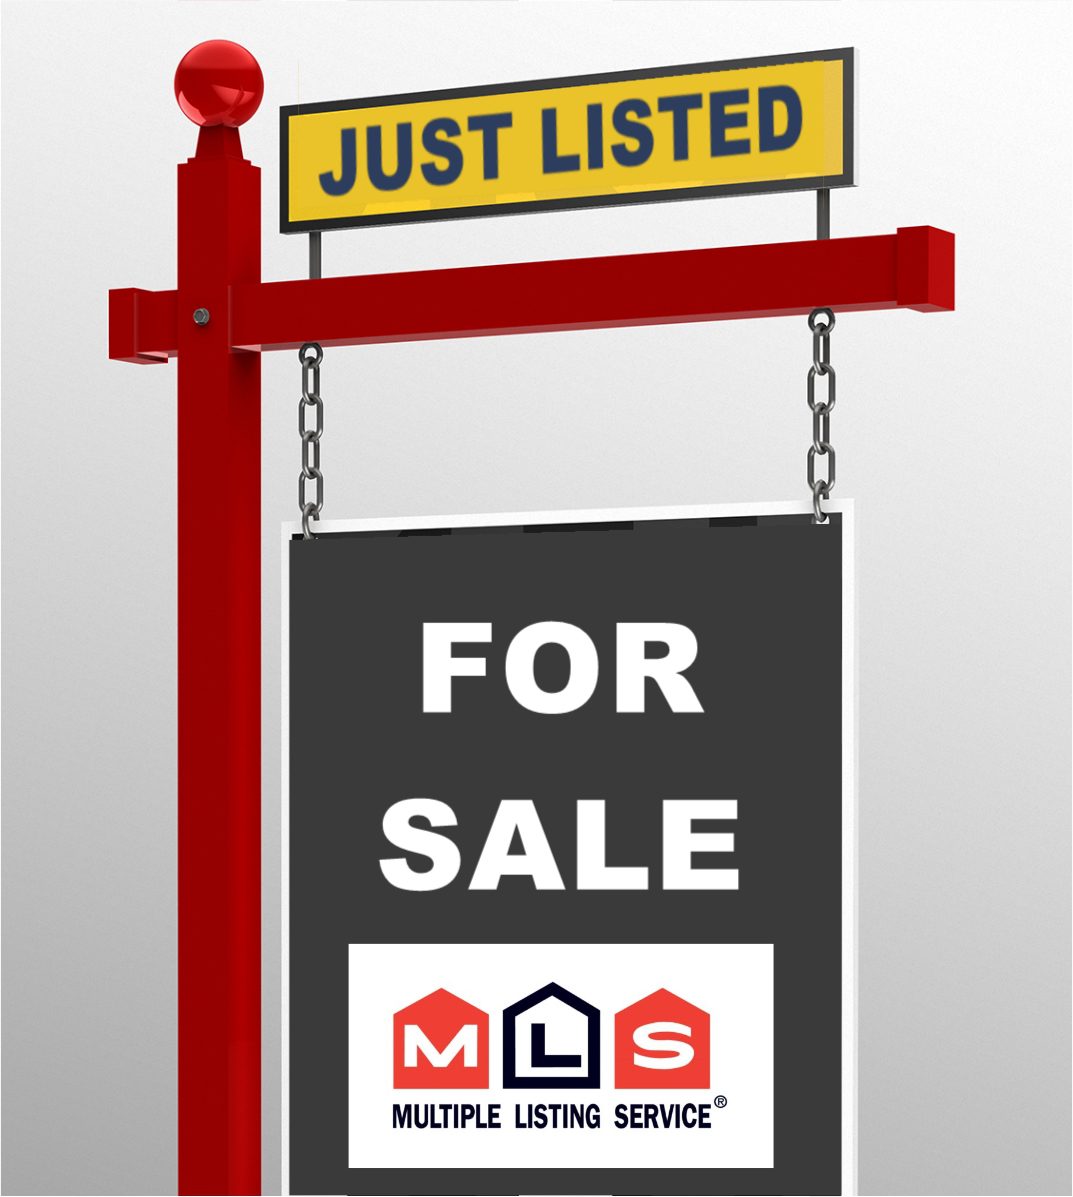 FOR SALE MLS sign with just listed banner